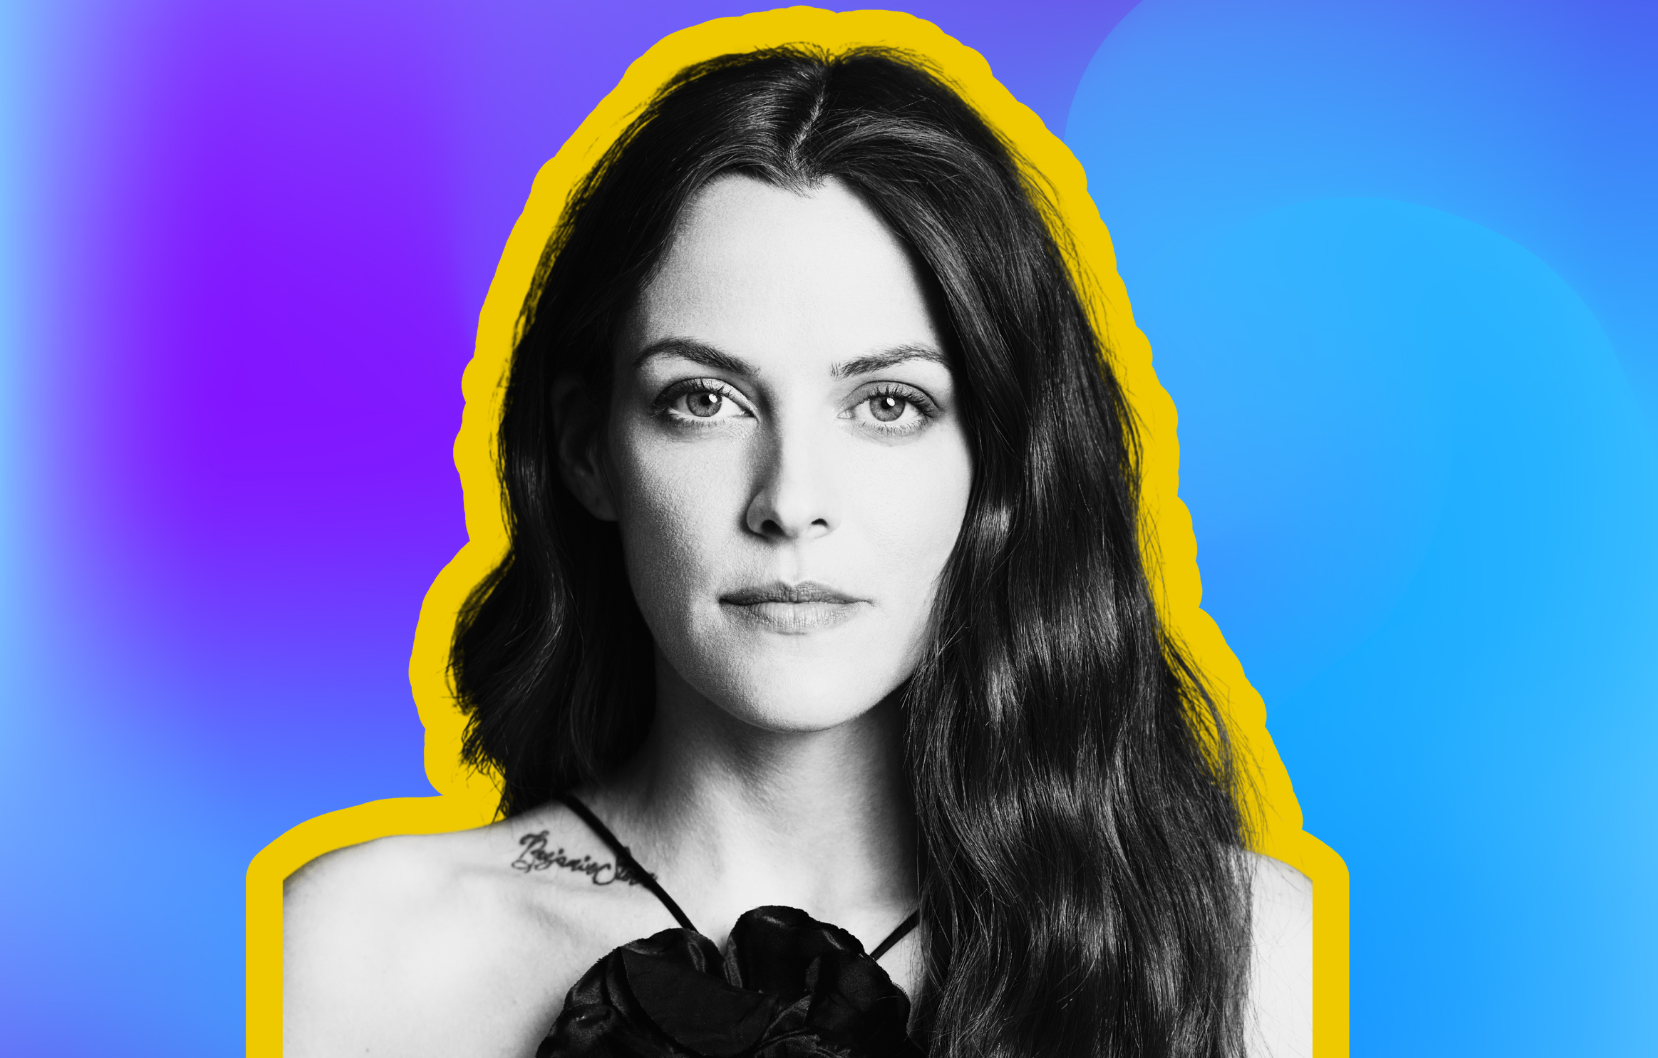 Riley Keough Leans Into Complexities on ‘Under the Bridge’: ‘When You’re a Storyteller, There’s So Much Empathy’